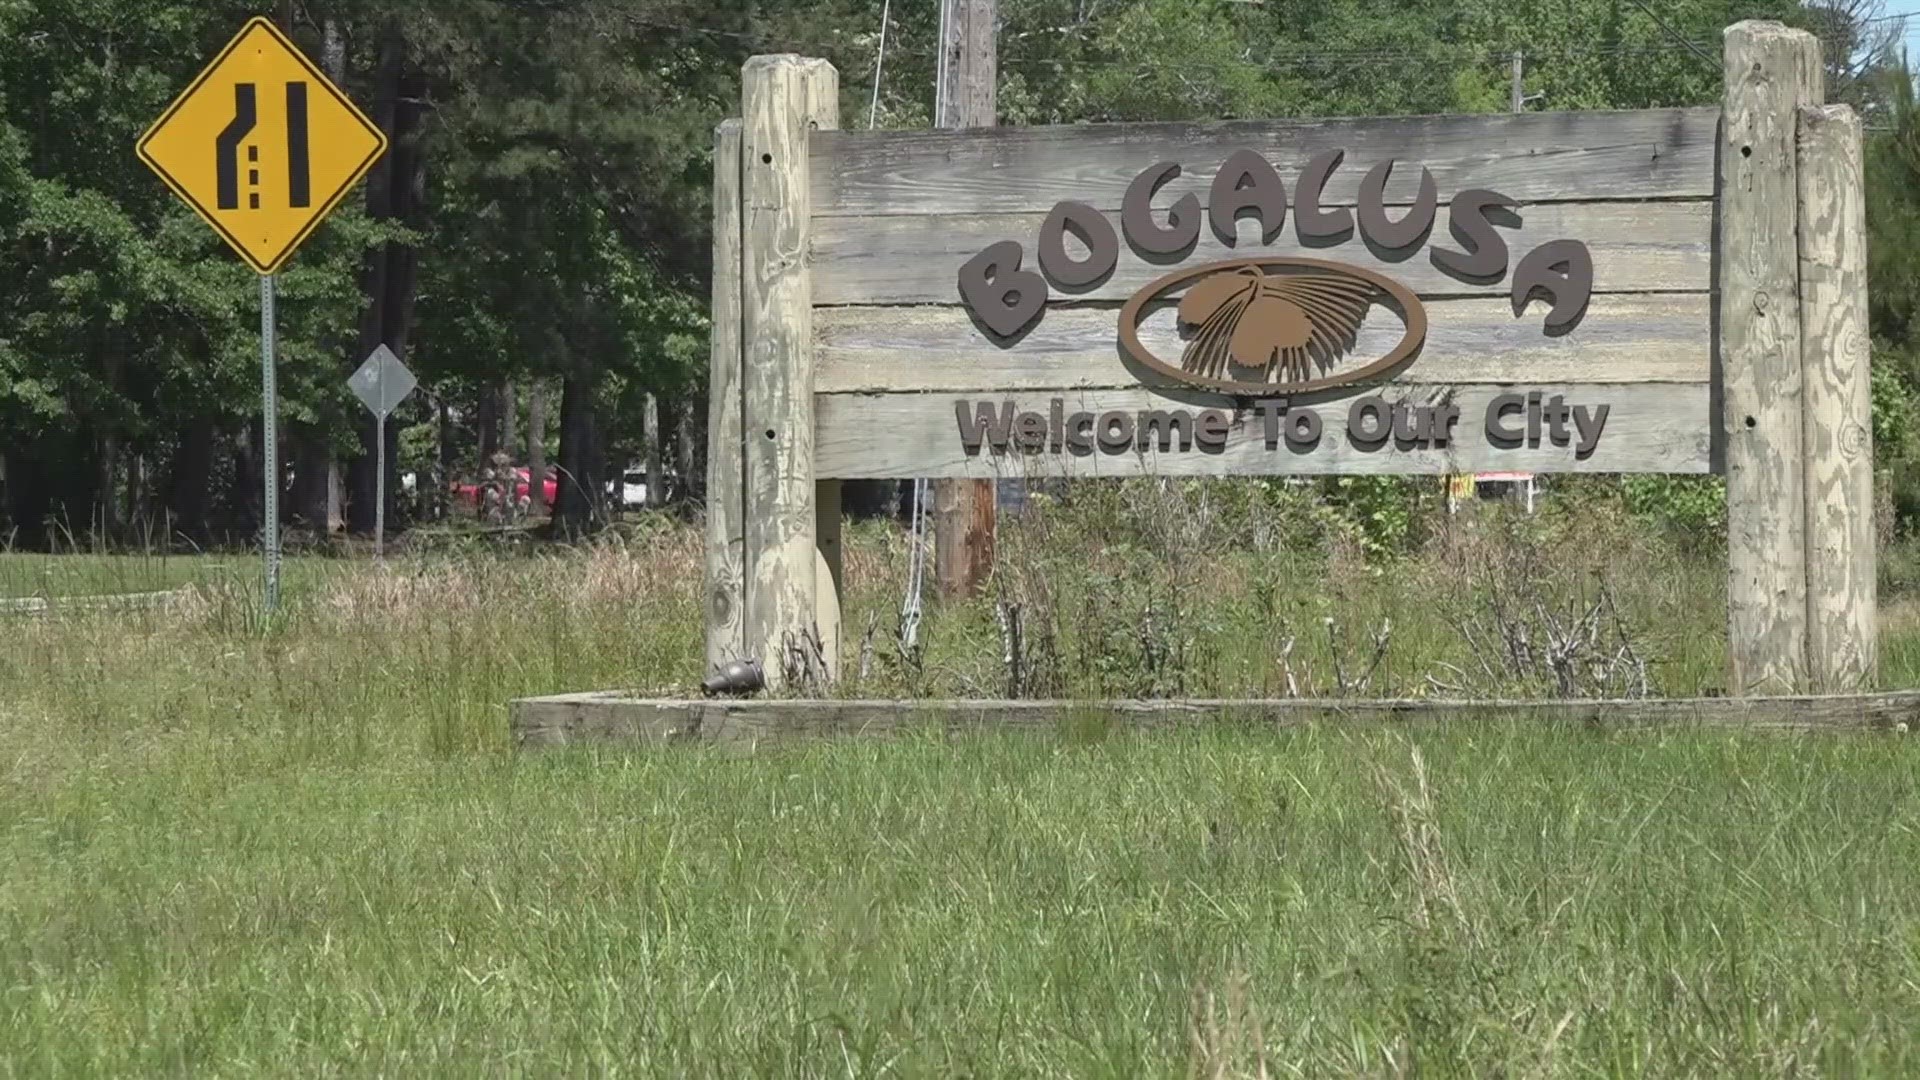 Much needed money is being withheld from the city of Bogalusa because the city is on the state auditor's non-compliance list. WWL Louisiana finds out why.